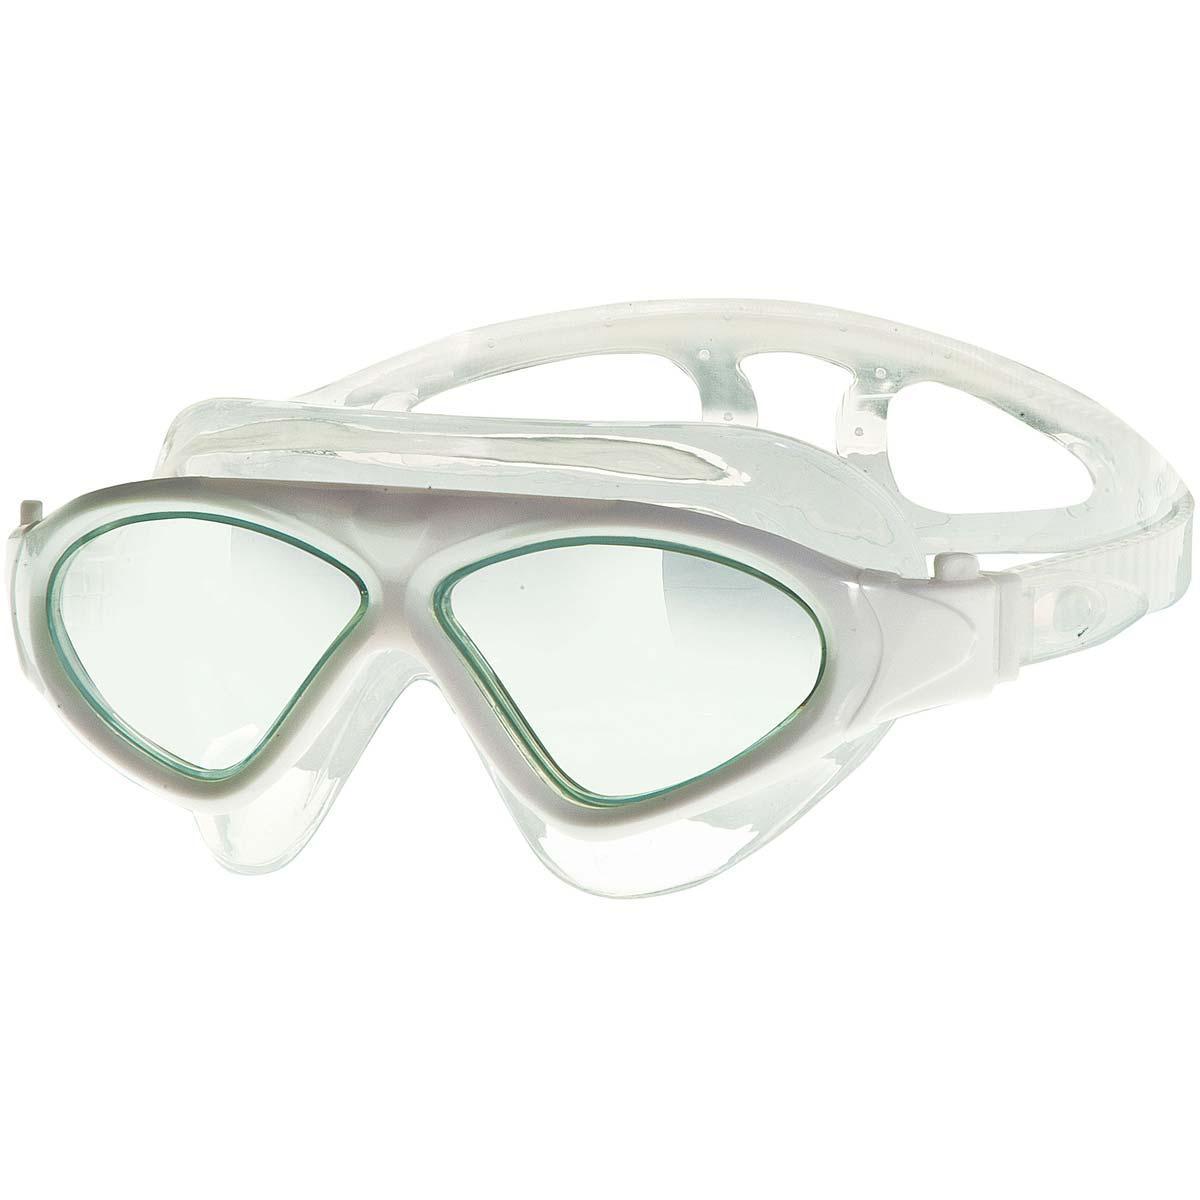 Foto Adult Zoggs Tri Vision Mask White/Clear Lens